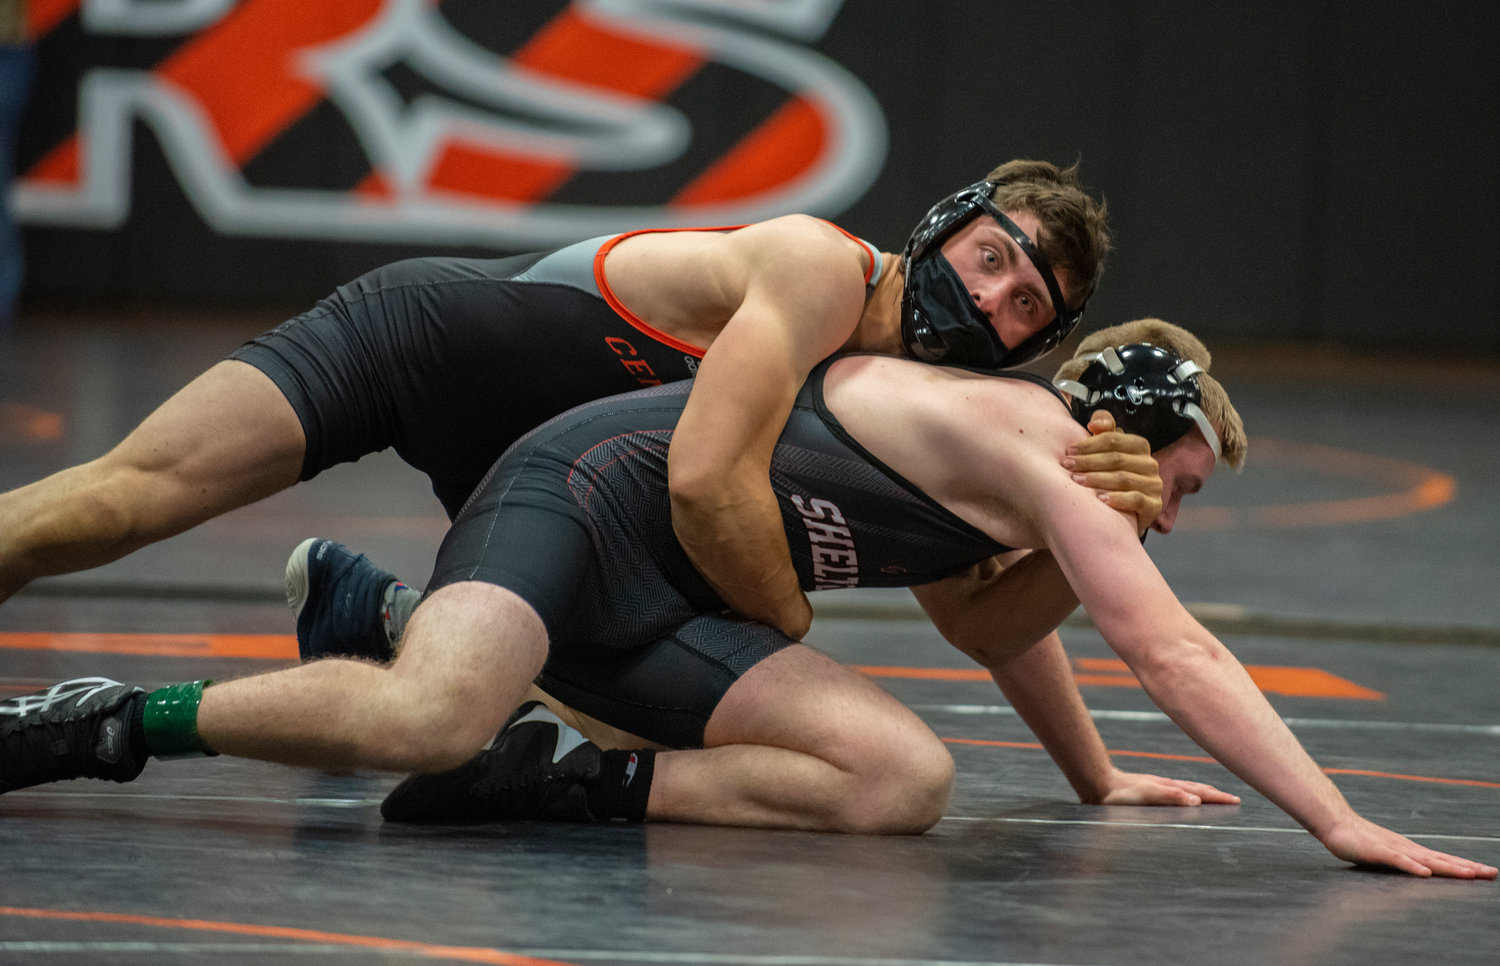 Centralia senior Sawyer Kassell wrestles a Shelton opponent in the 170-pound division at a wrestling meet in Centralia Tuesday. Kassel won by pin.